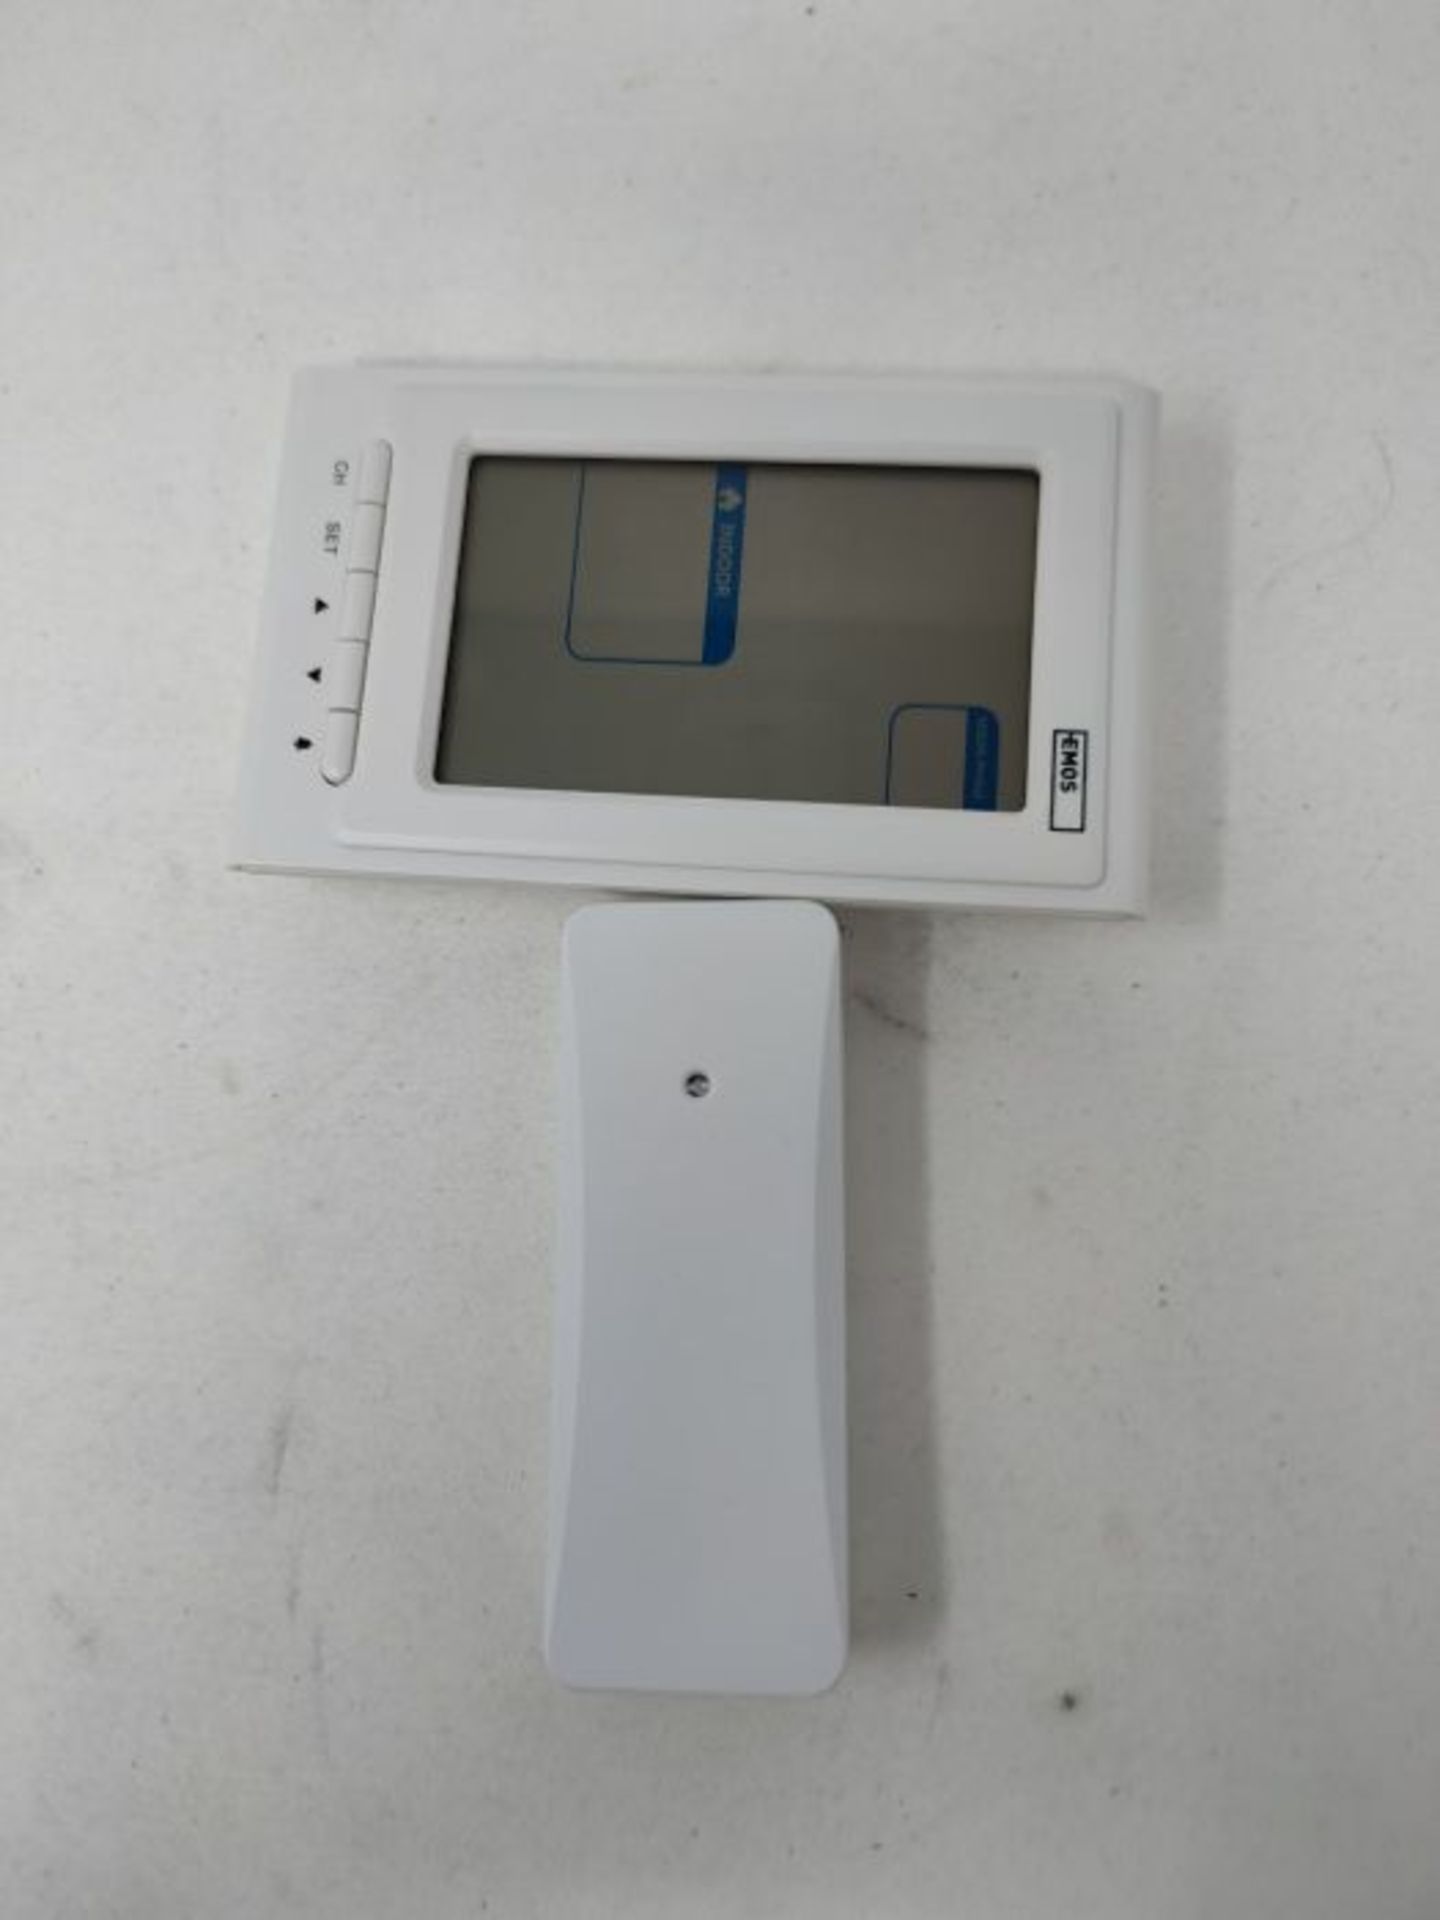 EMOS E0352 Mini Wireless Weather Station with Outdoor Sensor, Measures Indoor and Outd - Image 2 of 2